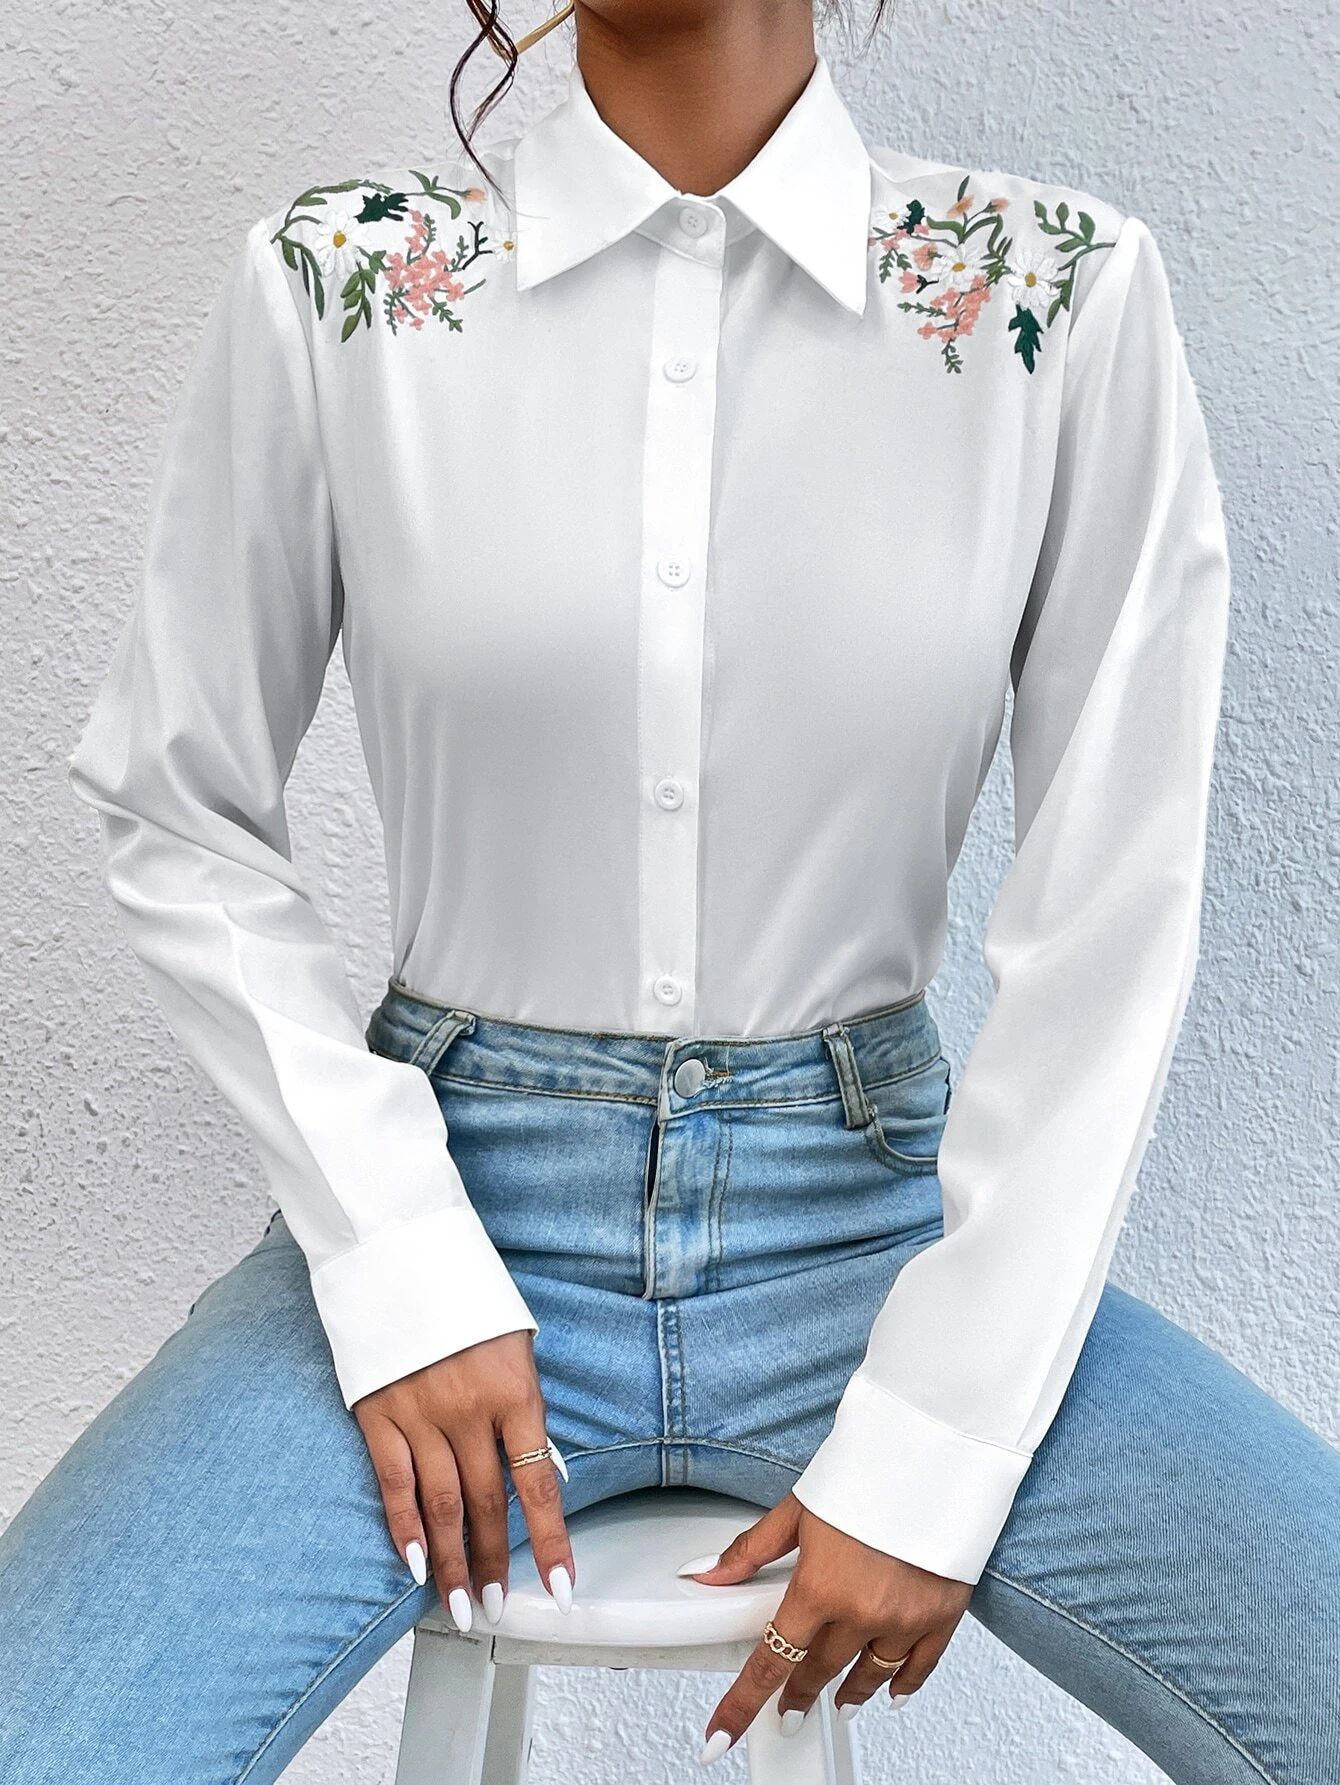 SHEIN Privé Floral Embroidery Button Front Blouse | SHEIN